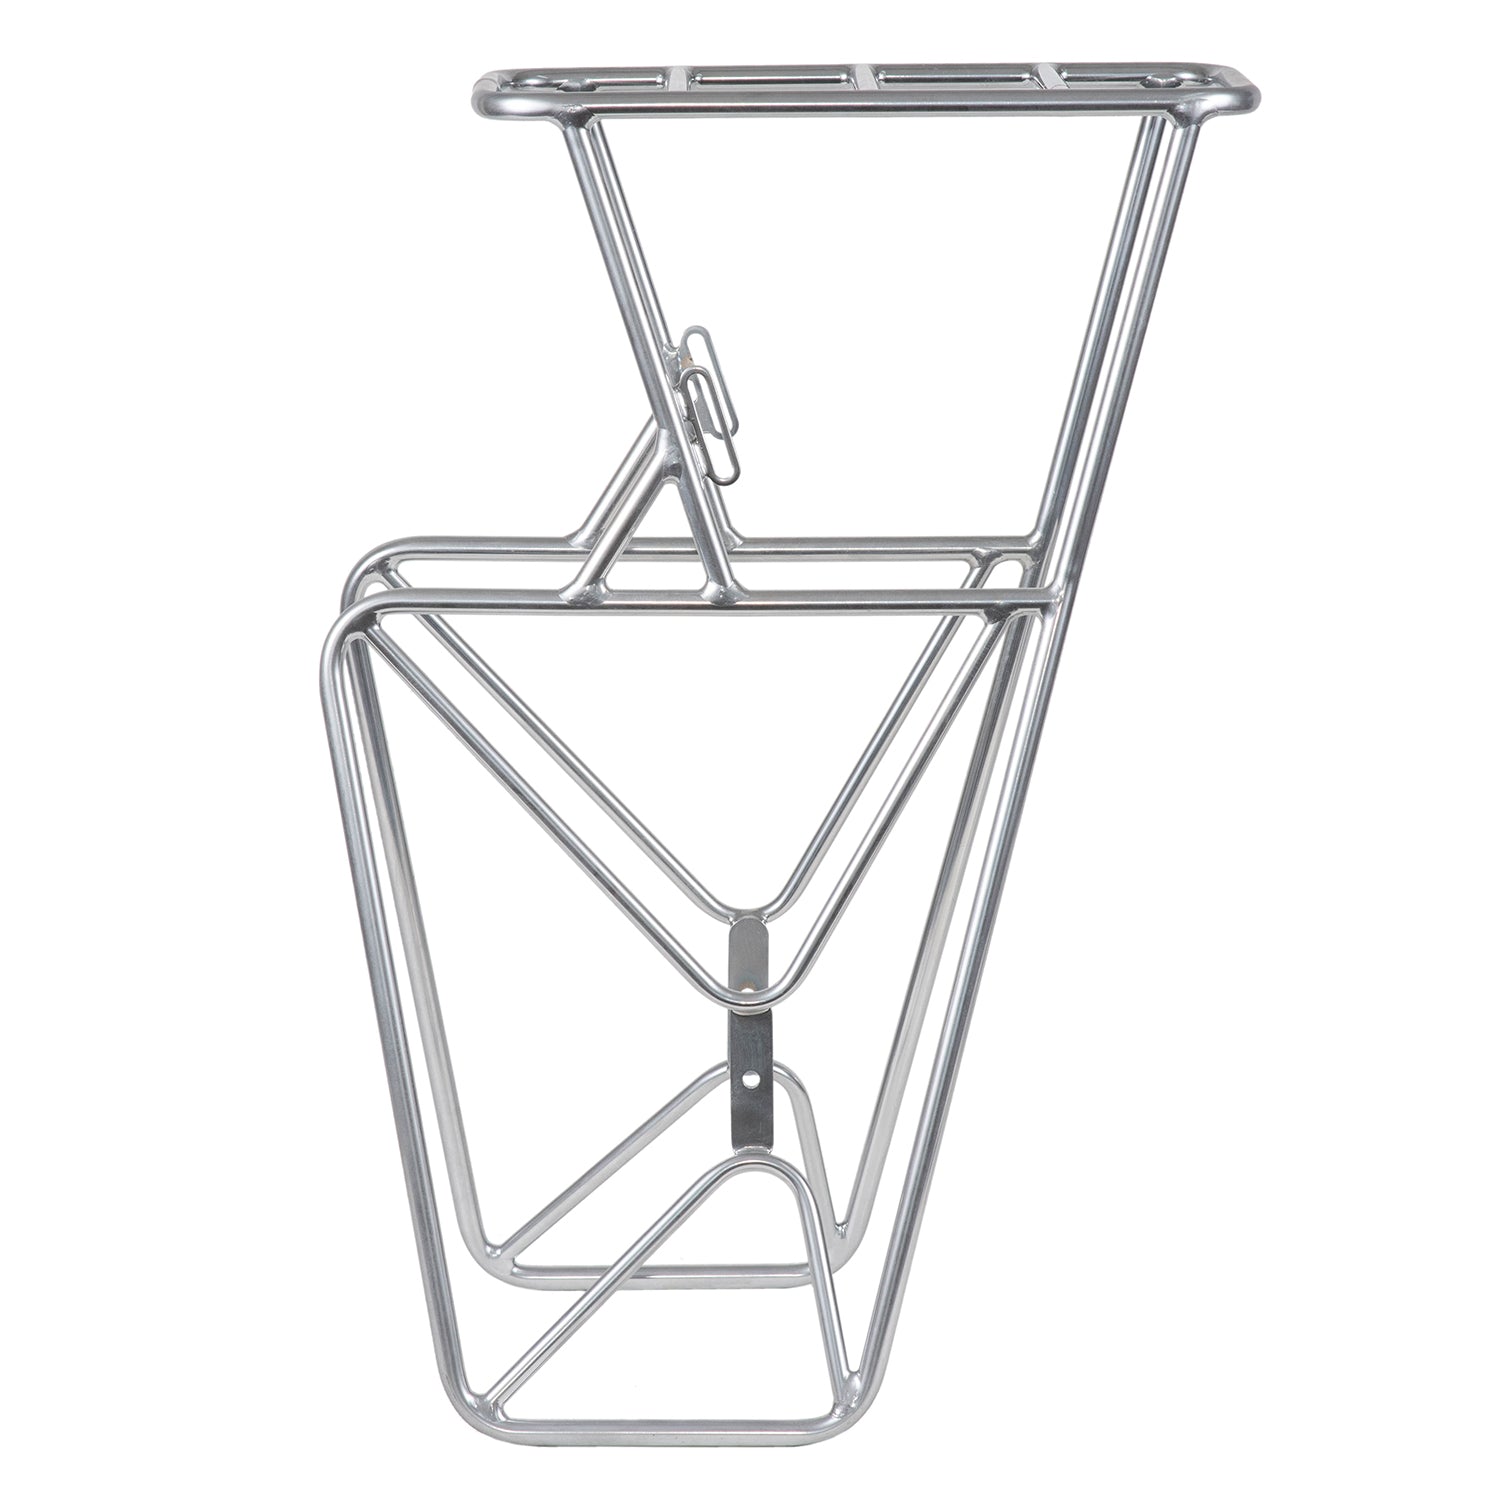 NITTO MT Campee F25 Front Rack